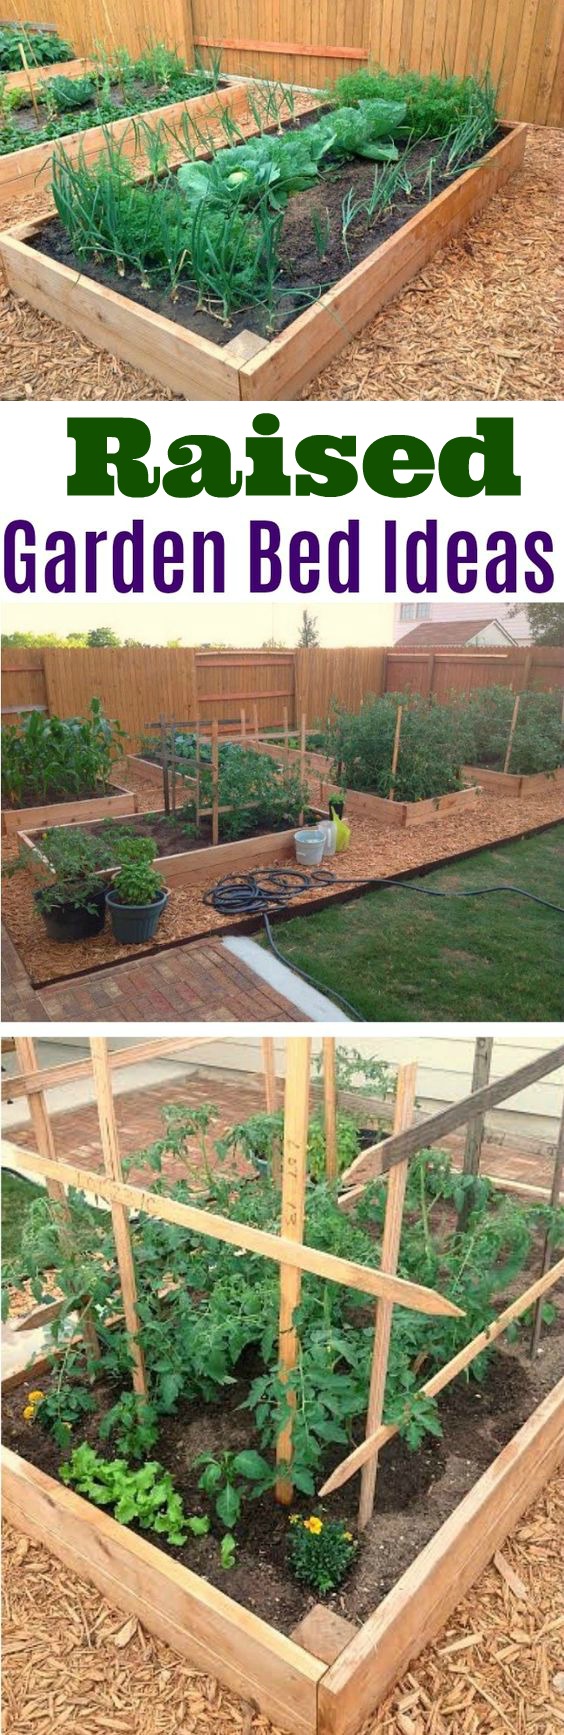 Beautiful Raised Garden Bed Pictures from Austin, Texas